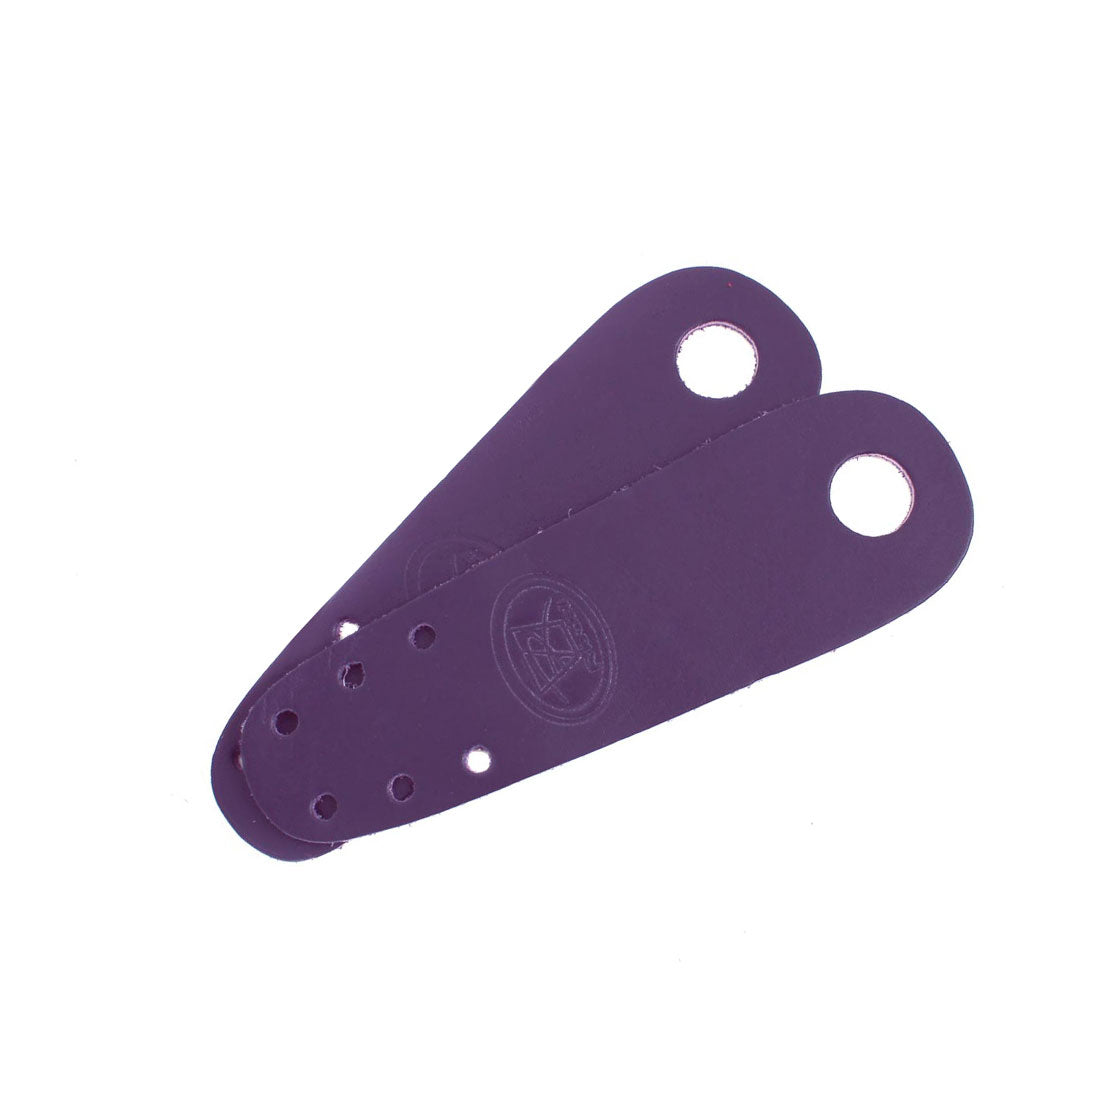 Riedell Flat Toe Guards 2pk - Leather Purple Roller Skate Hardware and Parts